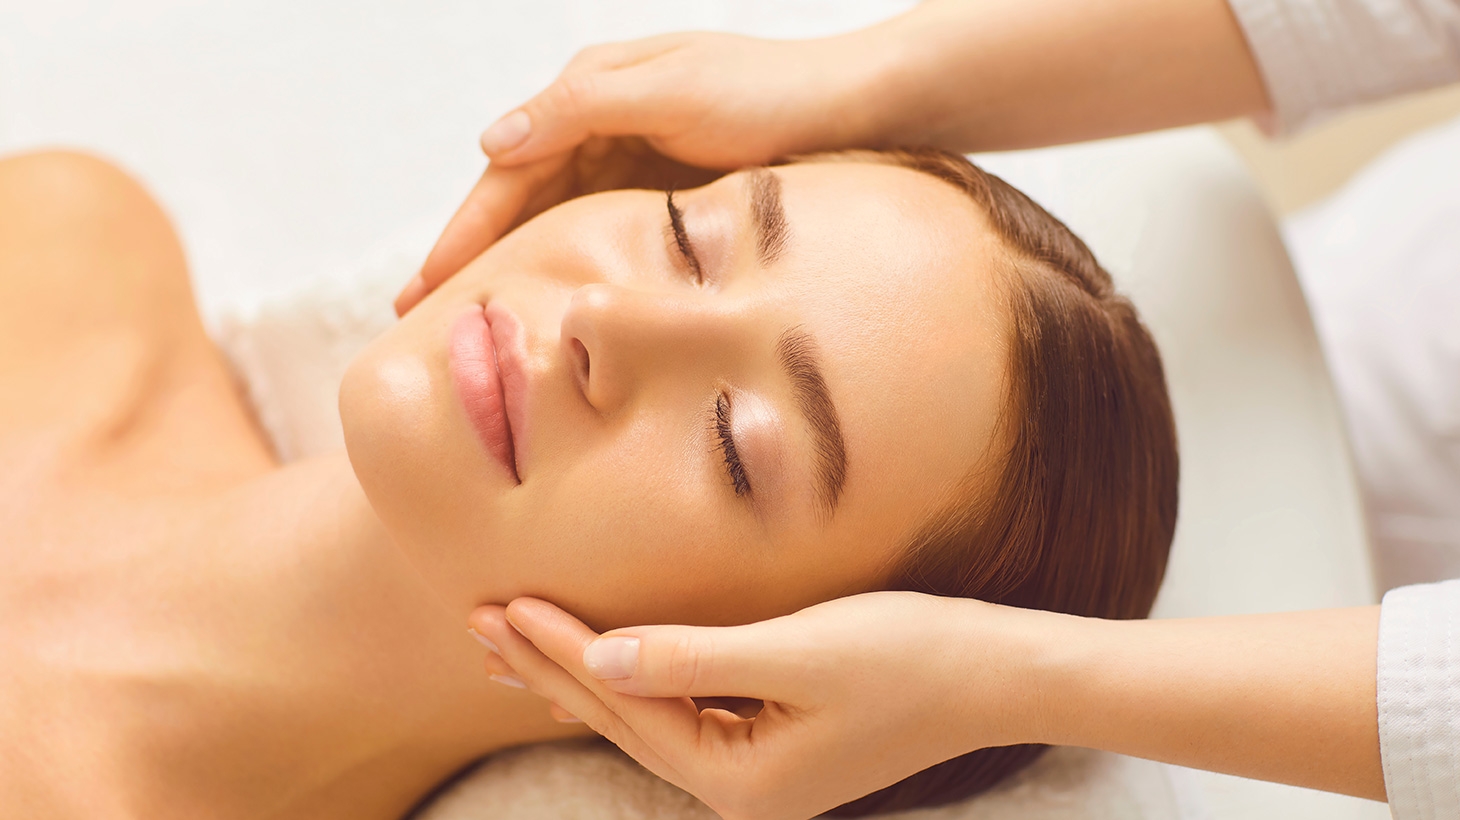 Two Hour Pampering With Facial Foot Spa And More In Newtown From Body Stimulants Cudo